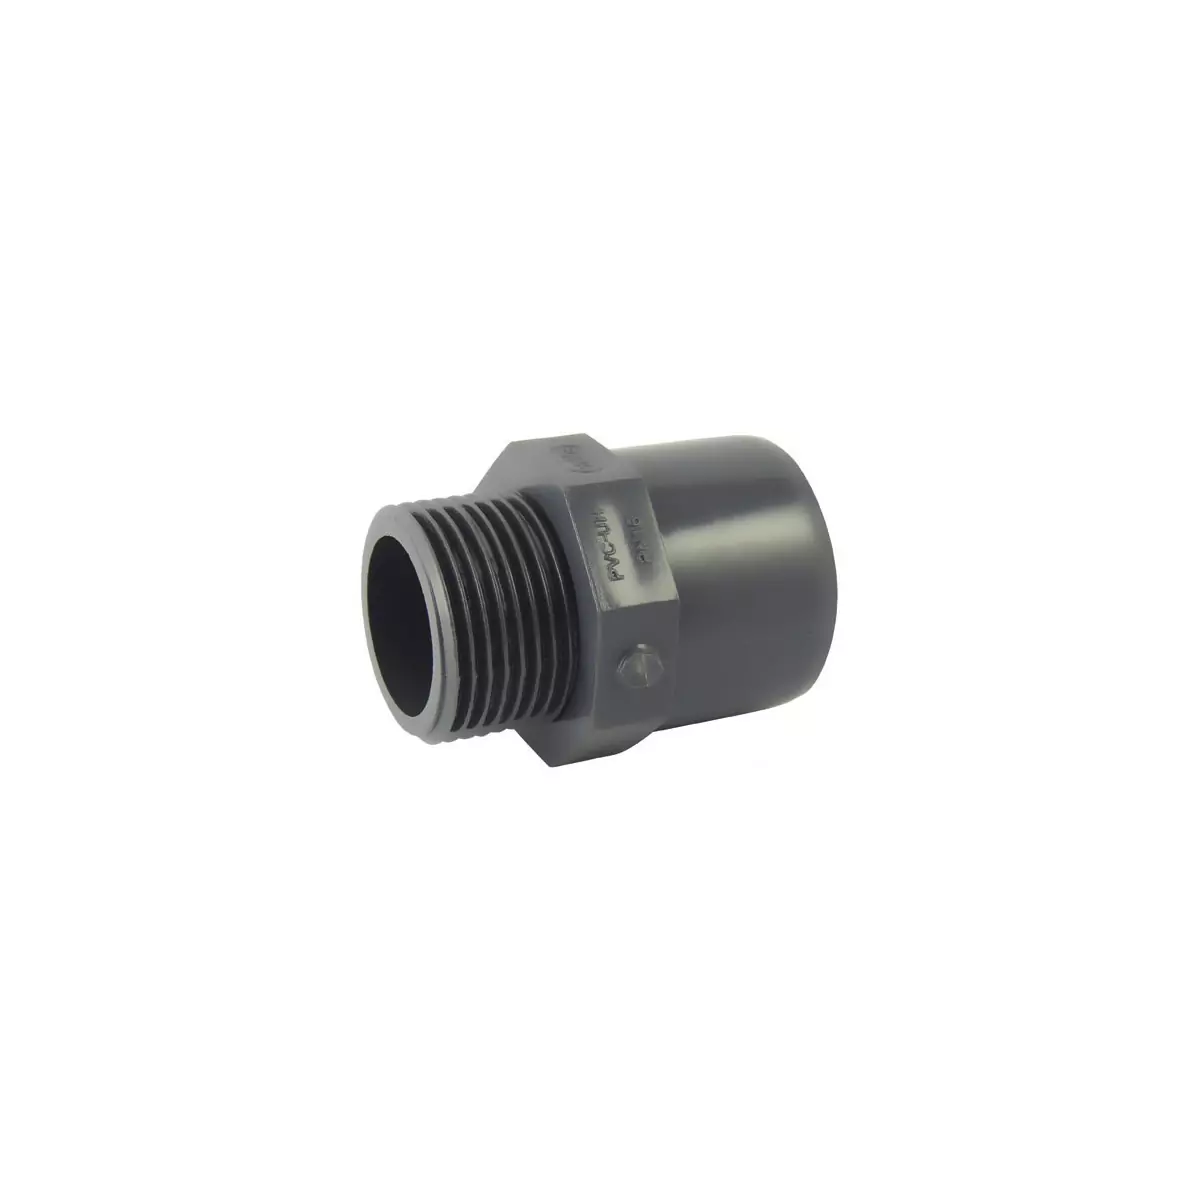 Male/female or male/male mixed PVC adapter to screw and stick